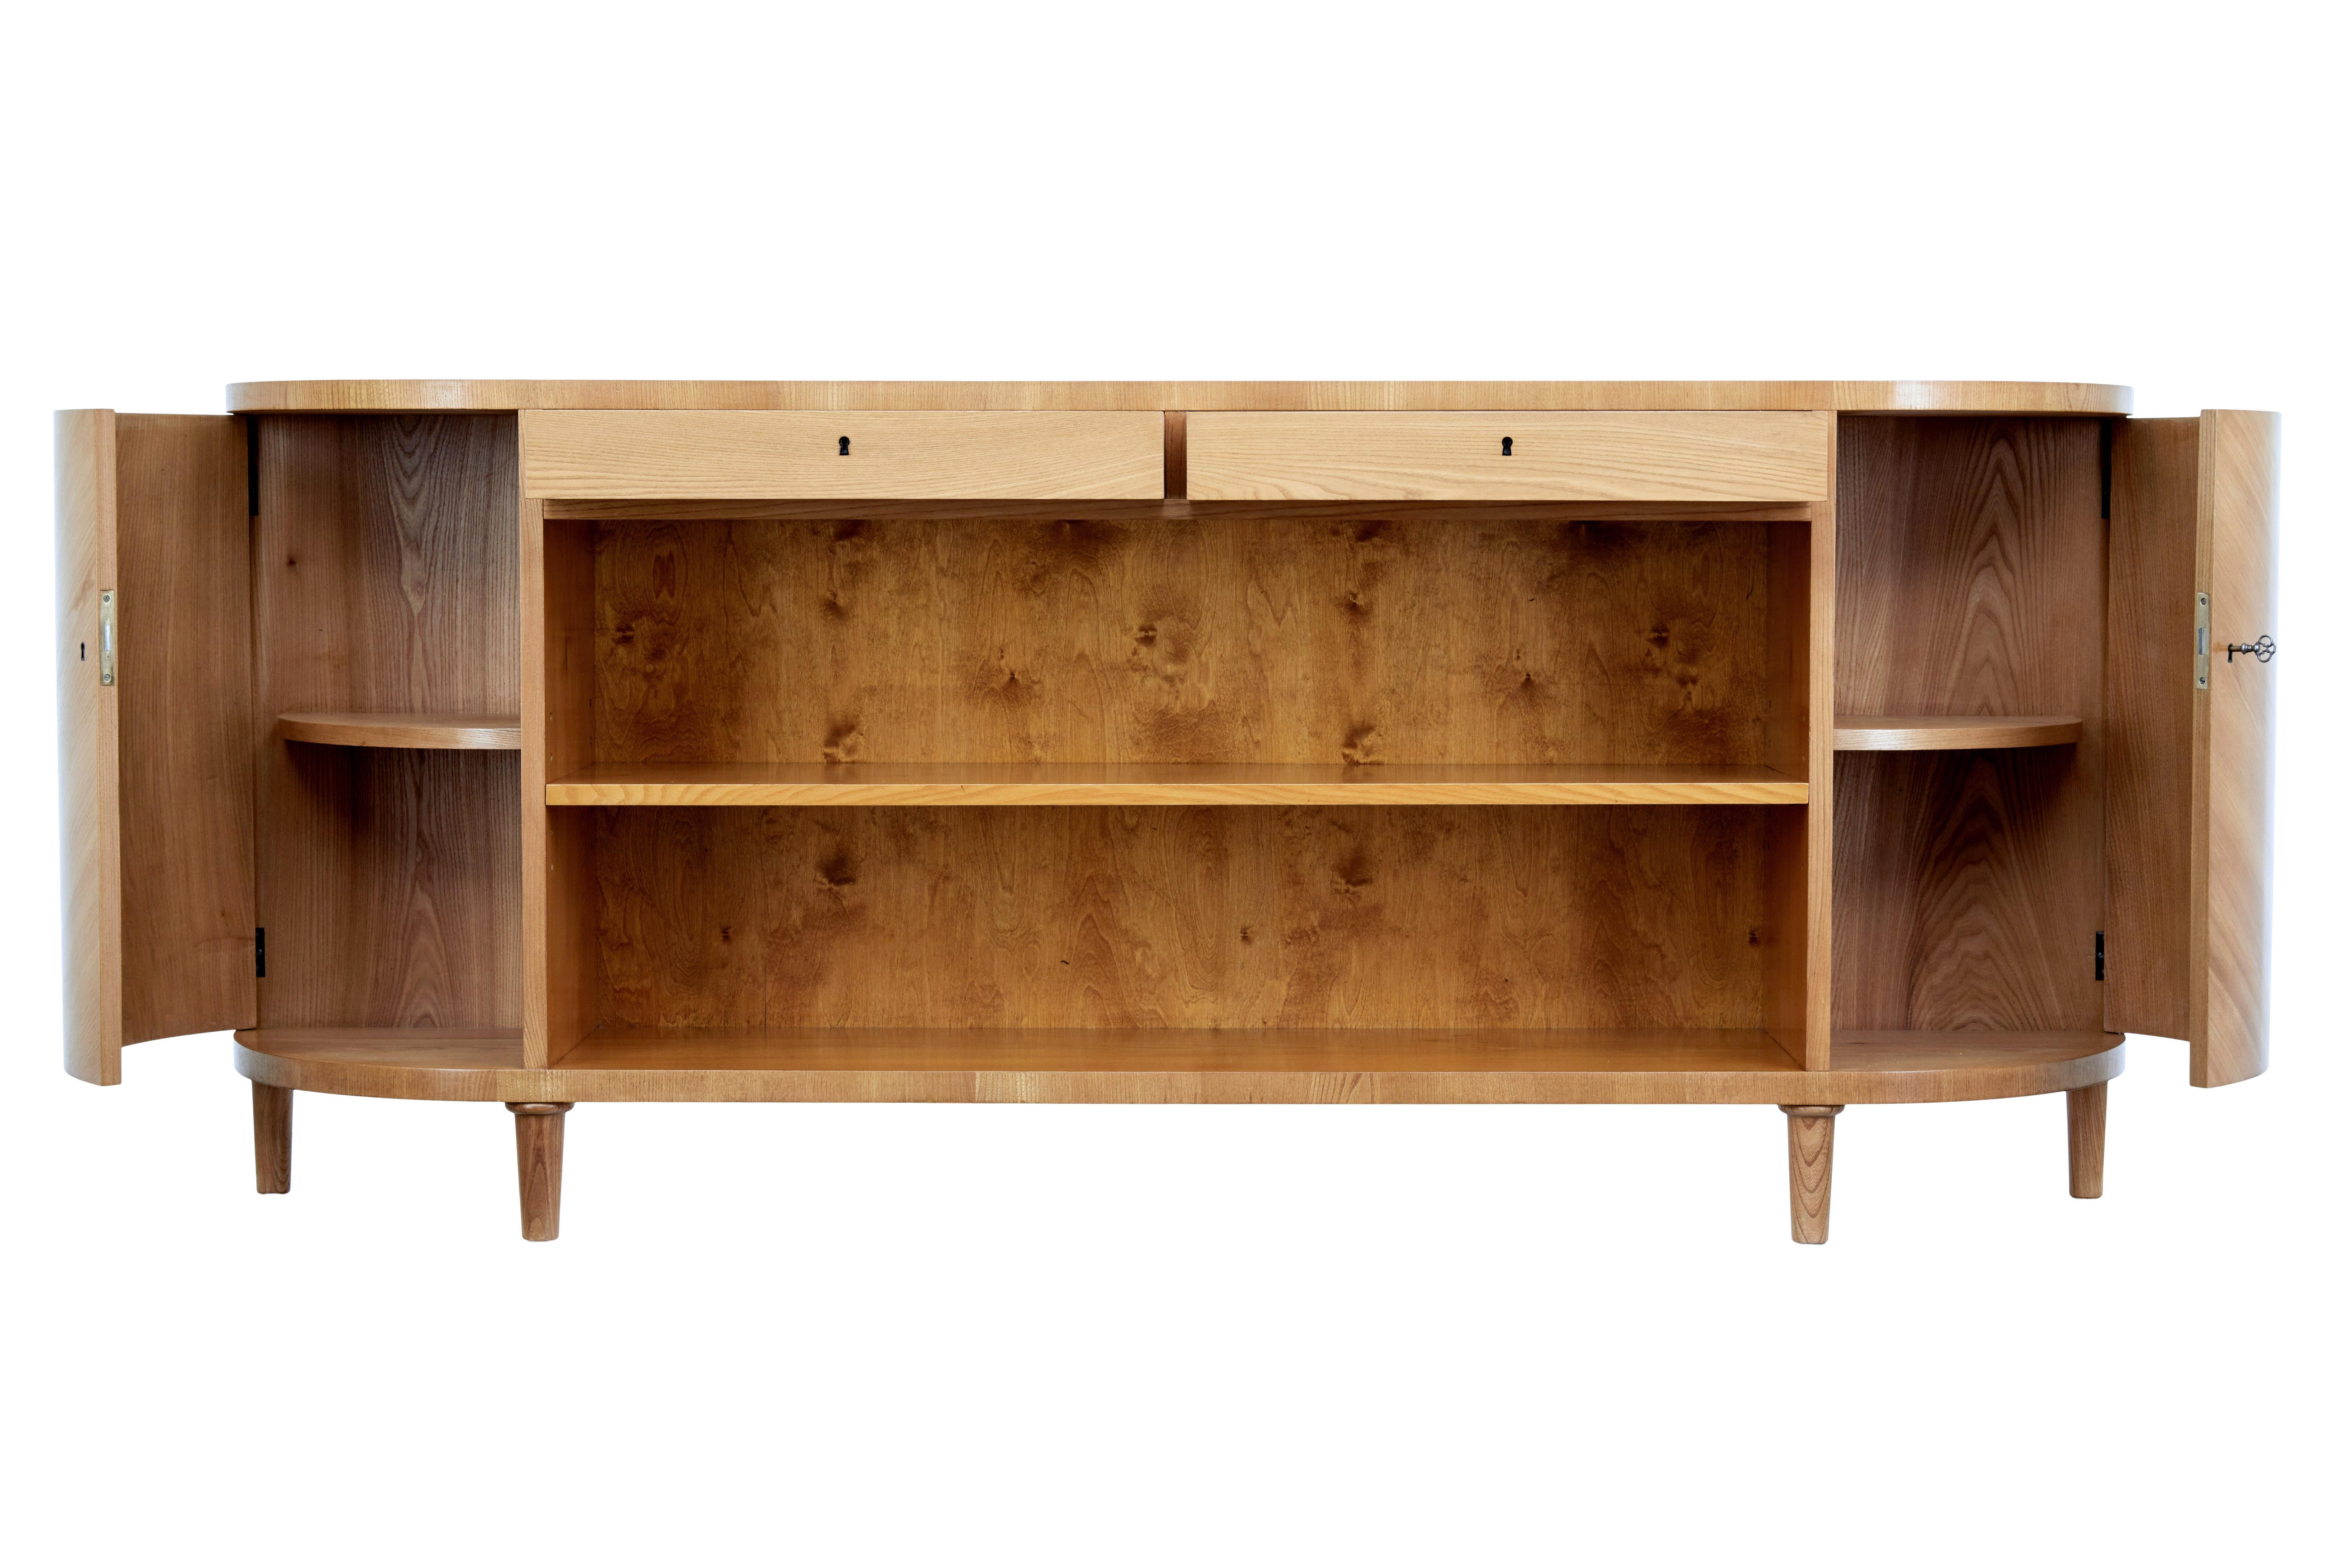 Swedish mid 20th century low sideboard with bookcase circa 1950.

Superb example of Swedish design for maximum storage. Beautifully shaped ends and veneered in elm allover. 2 drawers directly below the top surface with working locks and key. Main